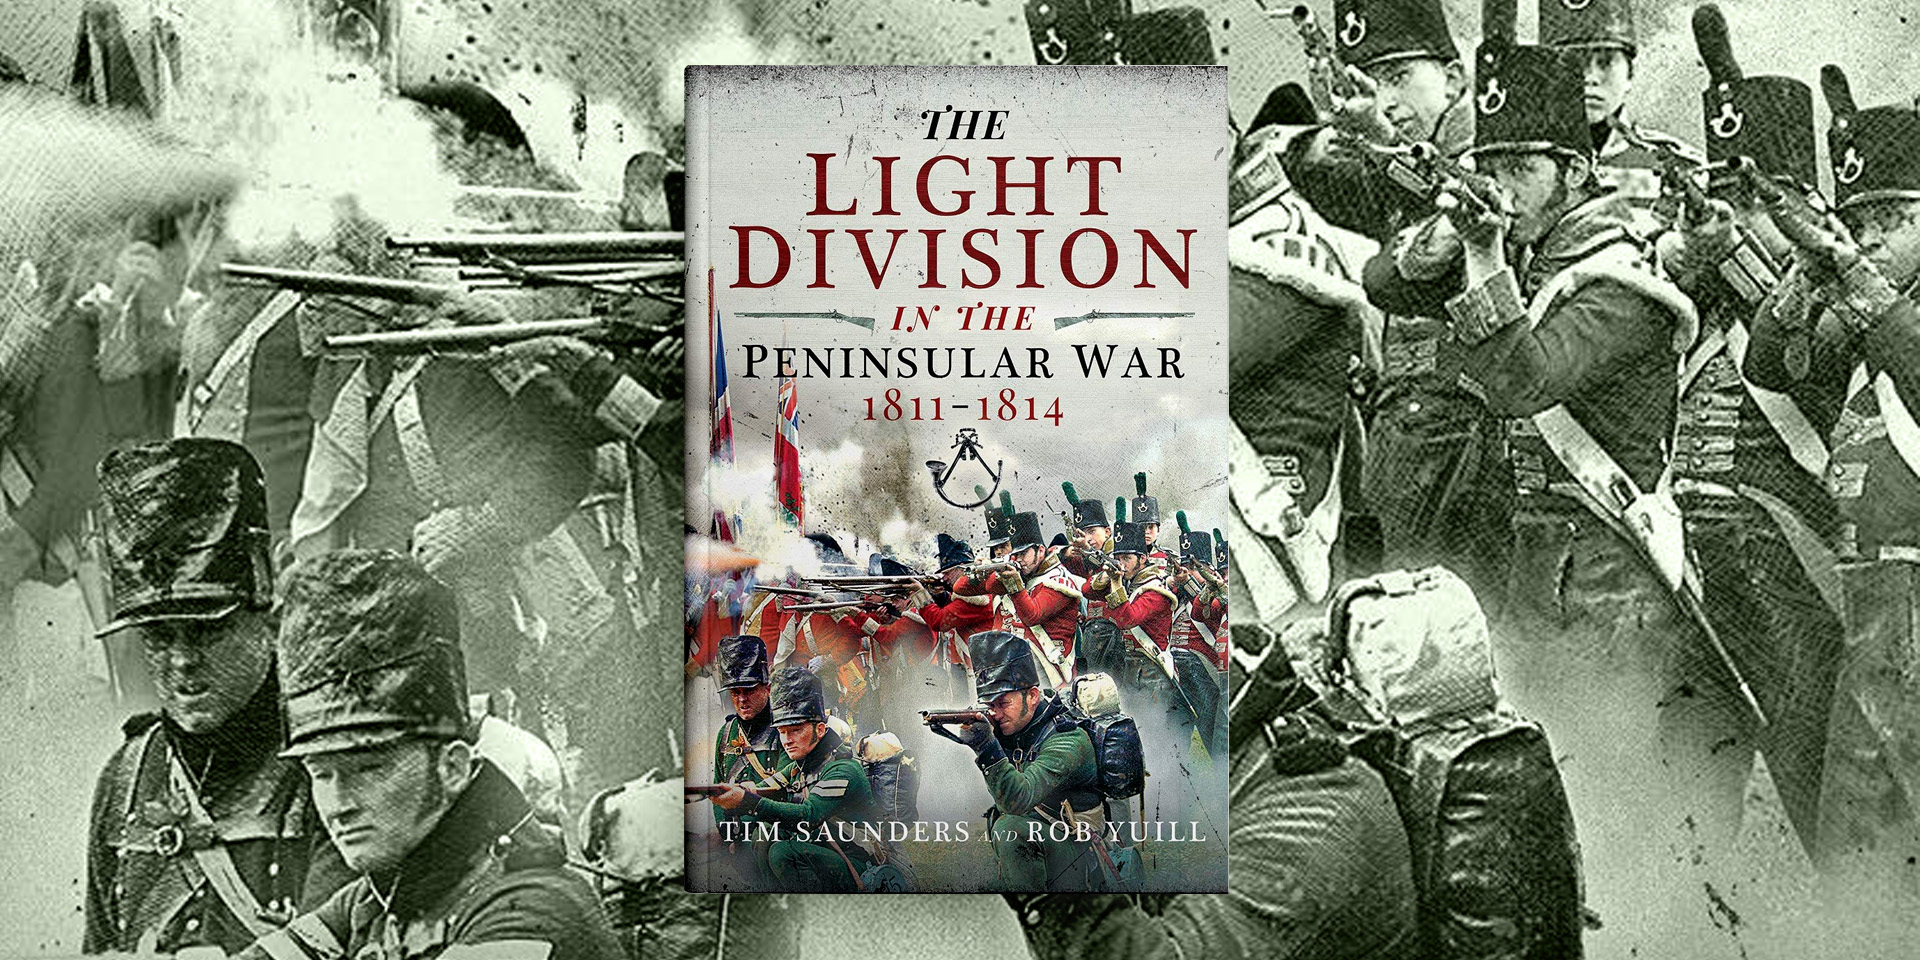 'The Light Division in the Peninsular War' book cover